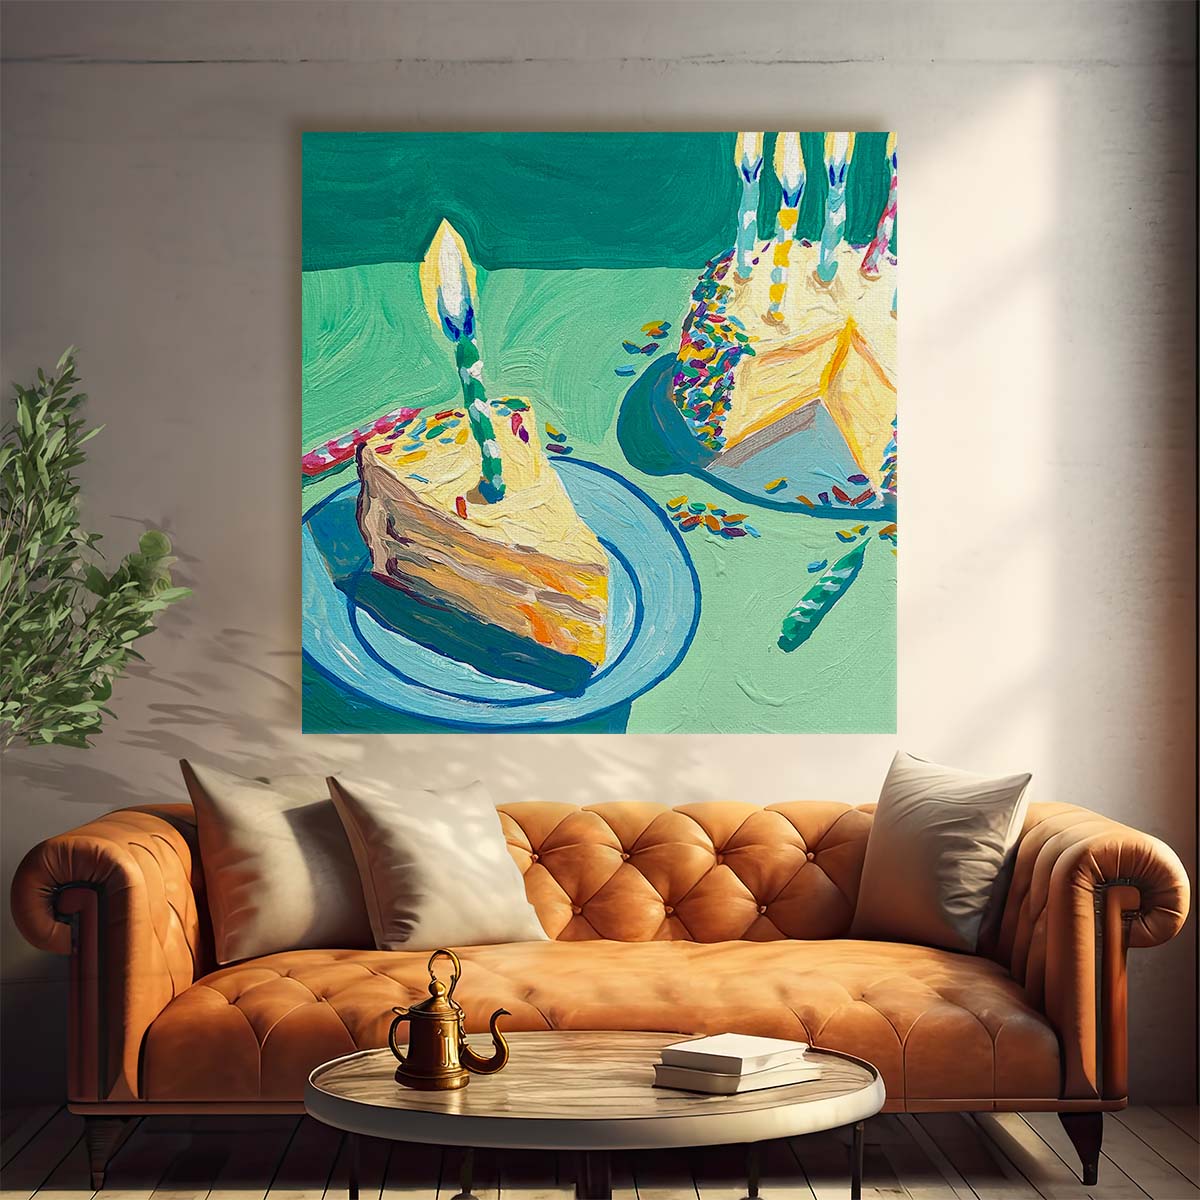 Colorful Birthday Cake Illustration with Candle Accents Wall Art by Luxuriance Designs. Made in USA.